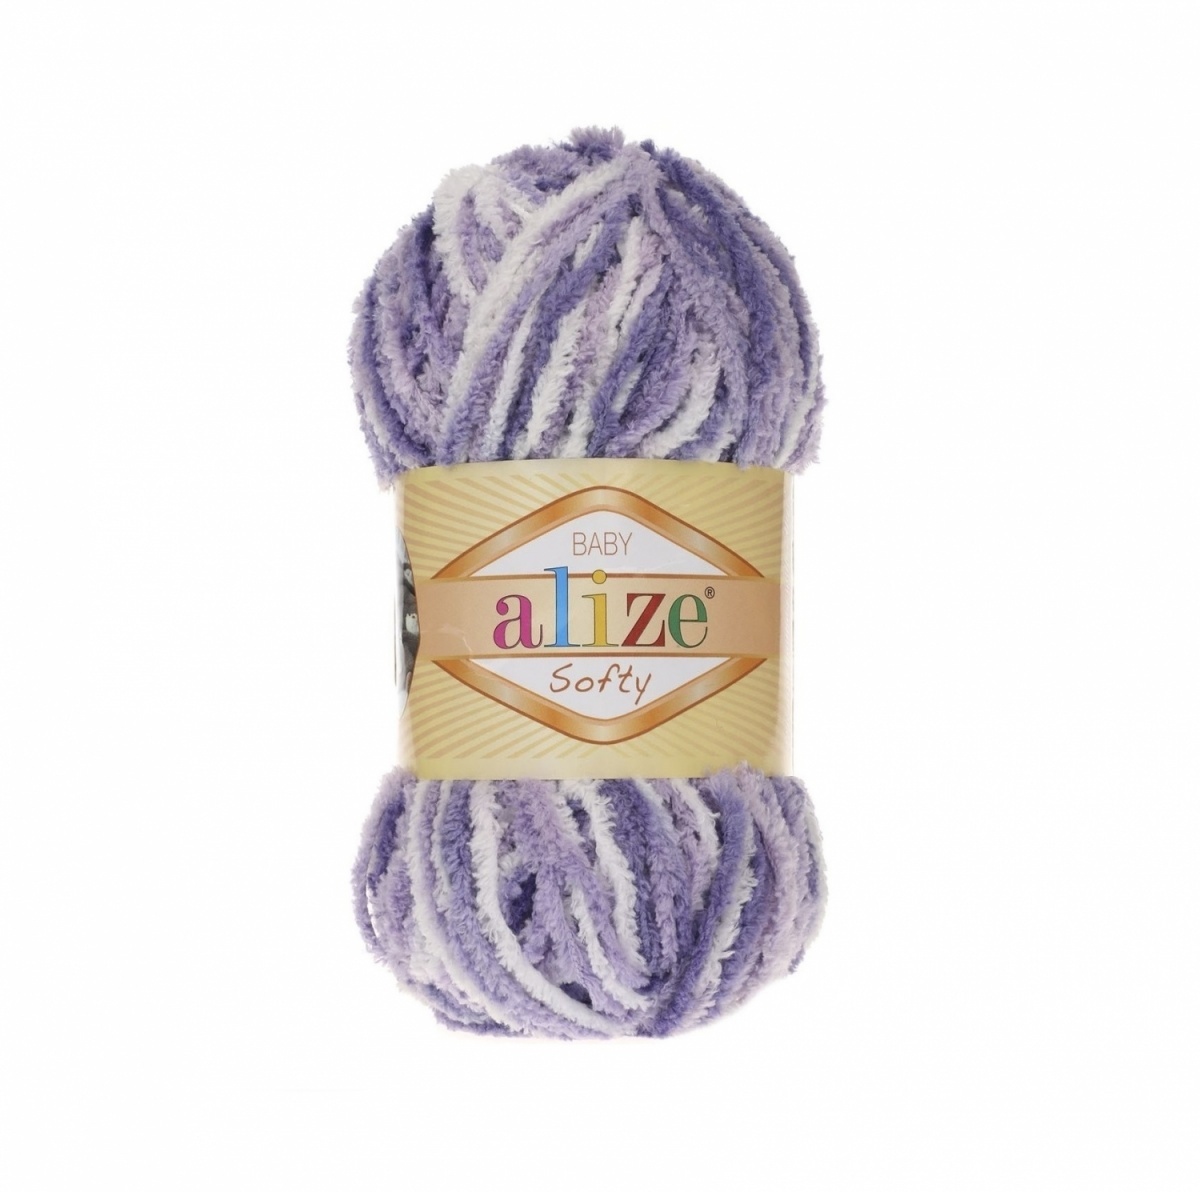 Alize Softy, 100% Micropolyester 5 Skein Value Pack, 250g фото 1